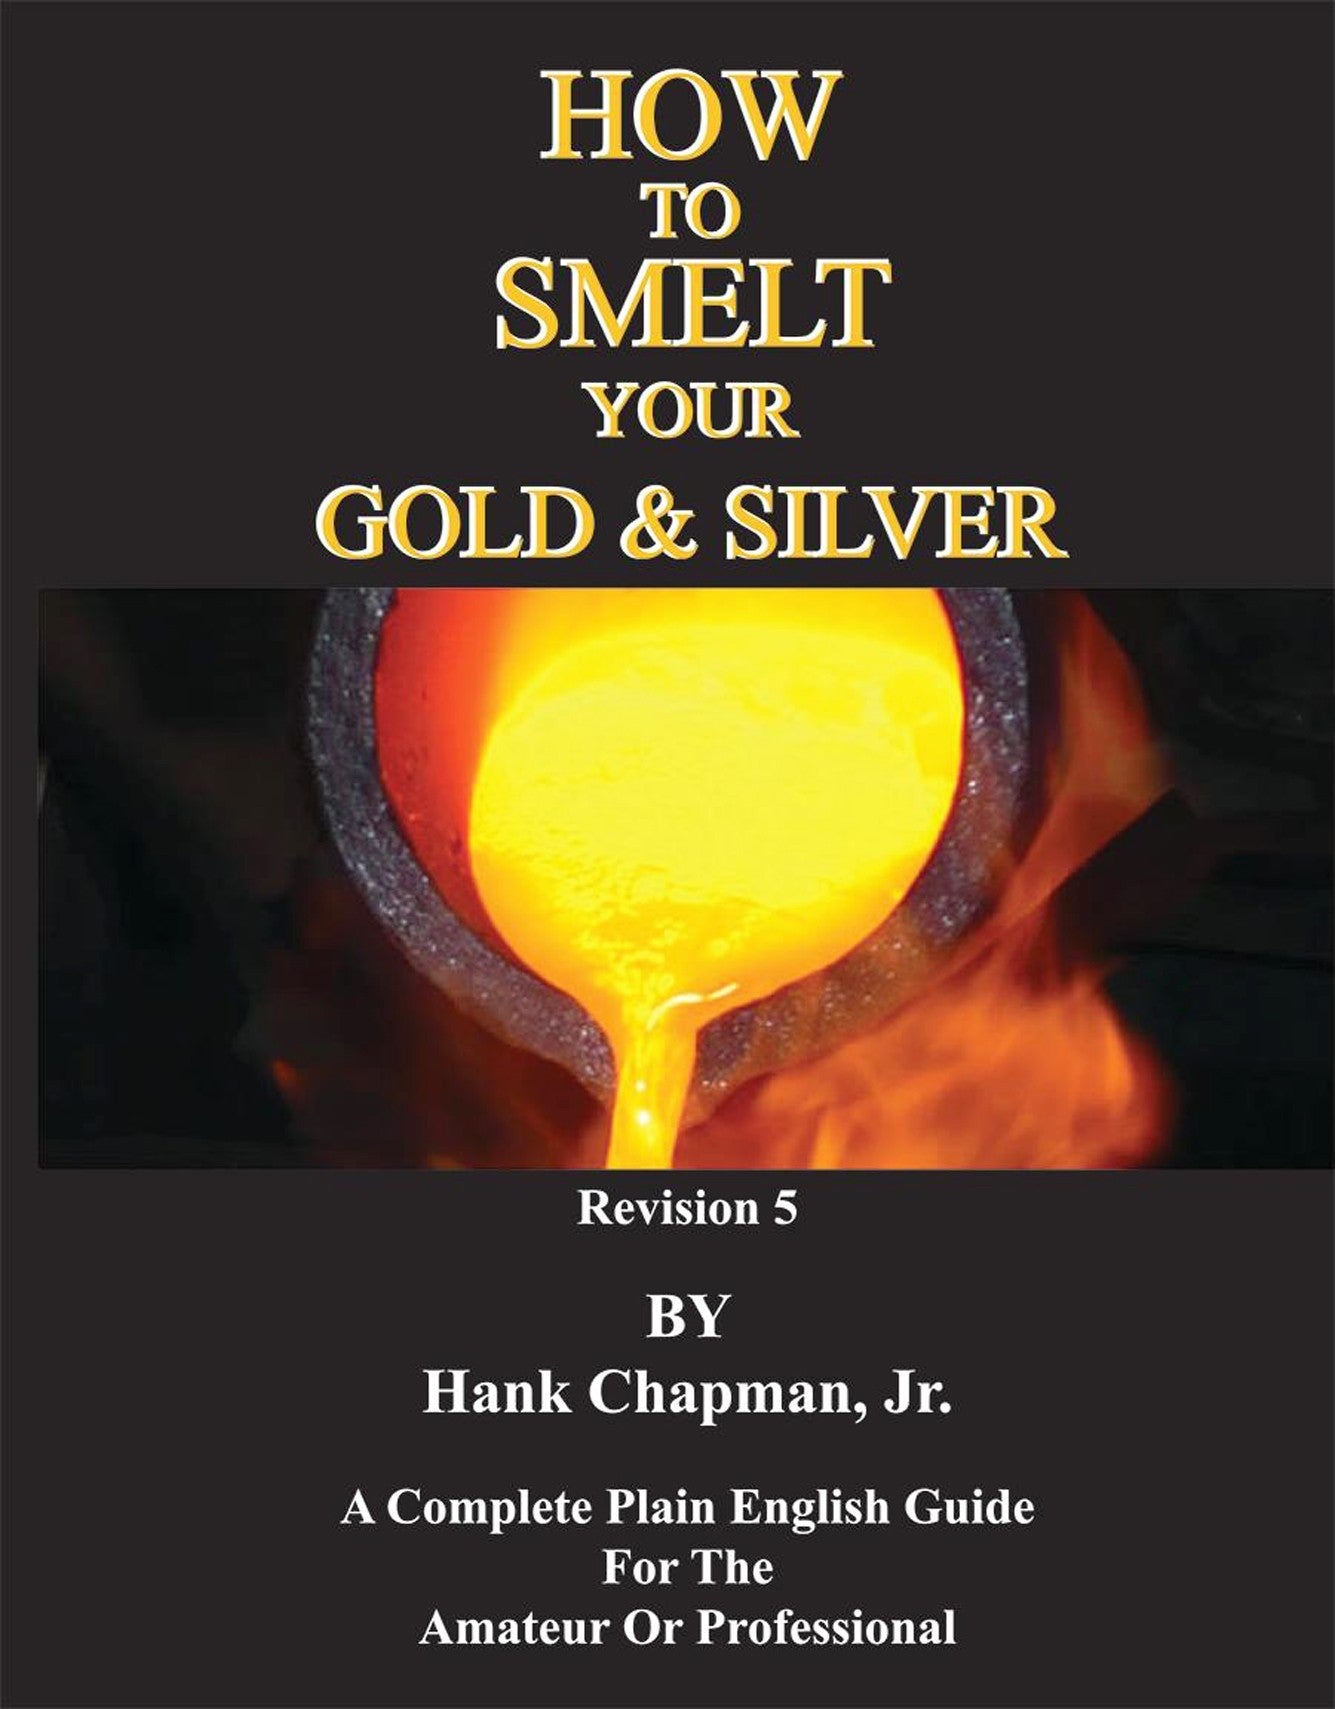 How to smelt your Gold & Silver